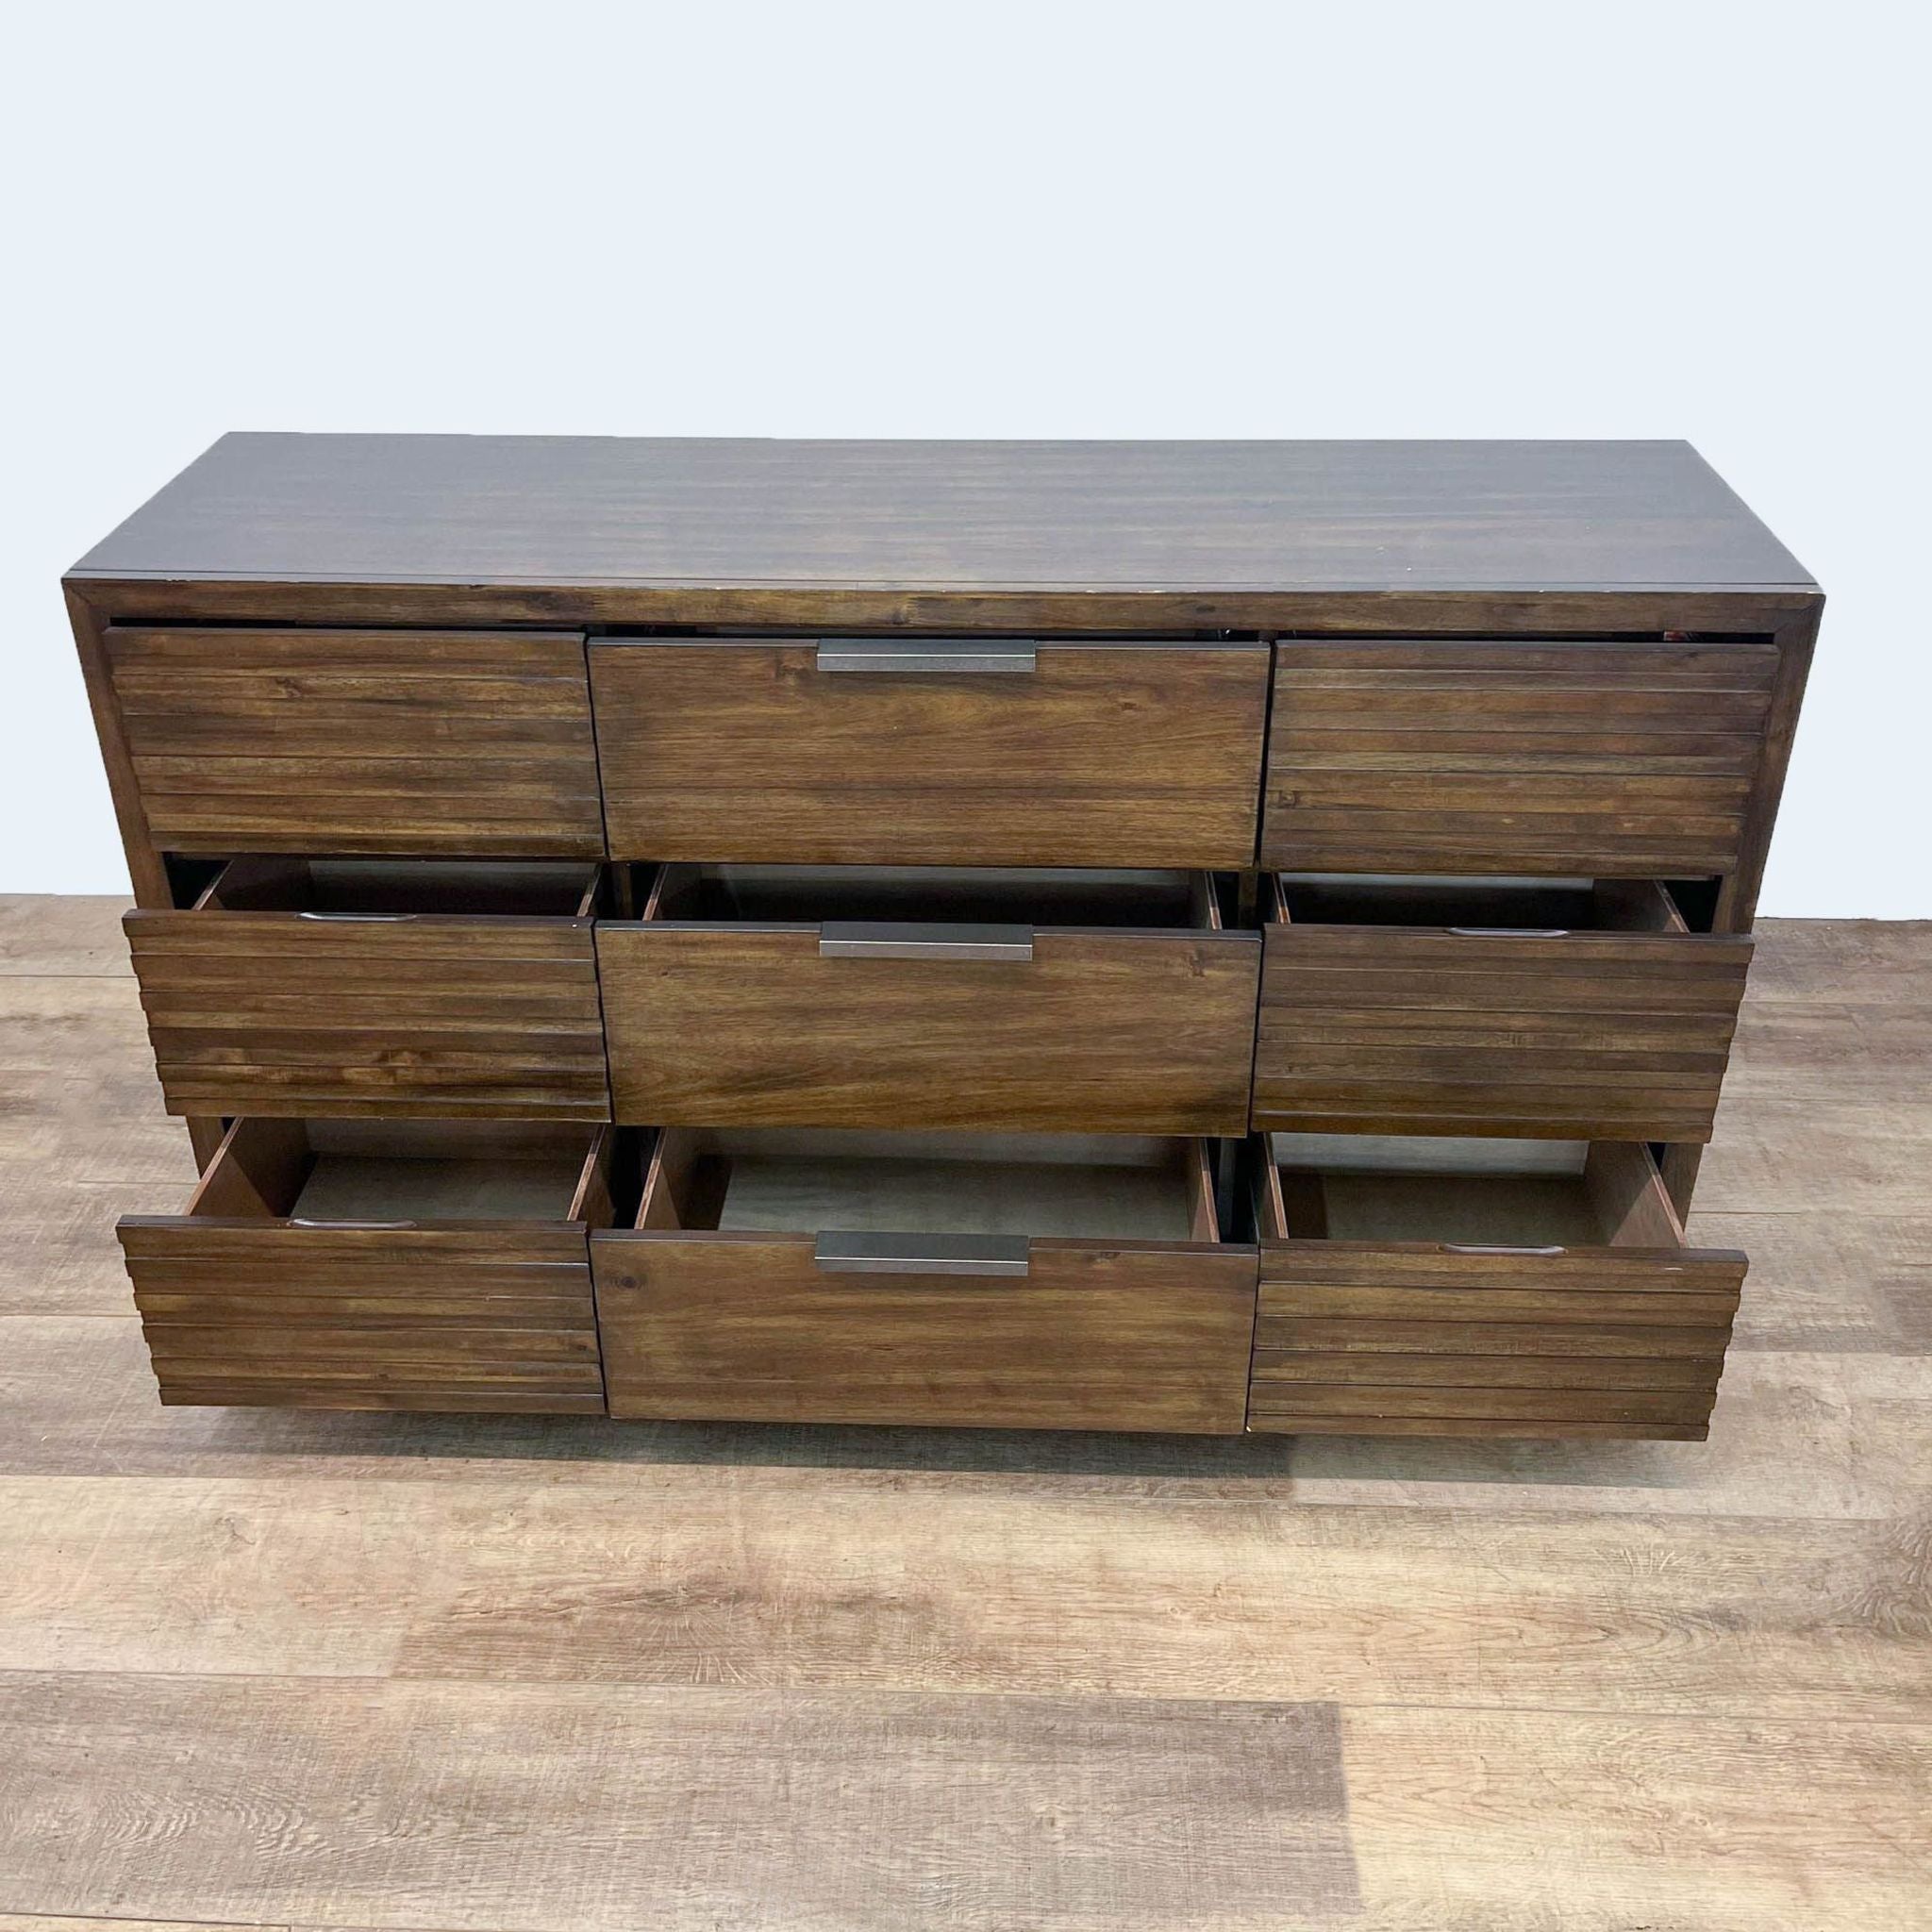 Furniture of America wood and wood veneer dresser, featuring 6 drawers with slatted fronts and metal handles, drawers open.